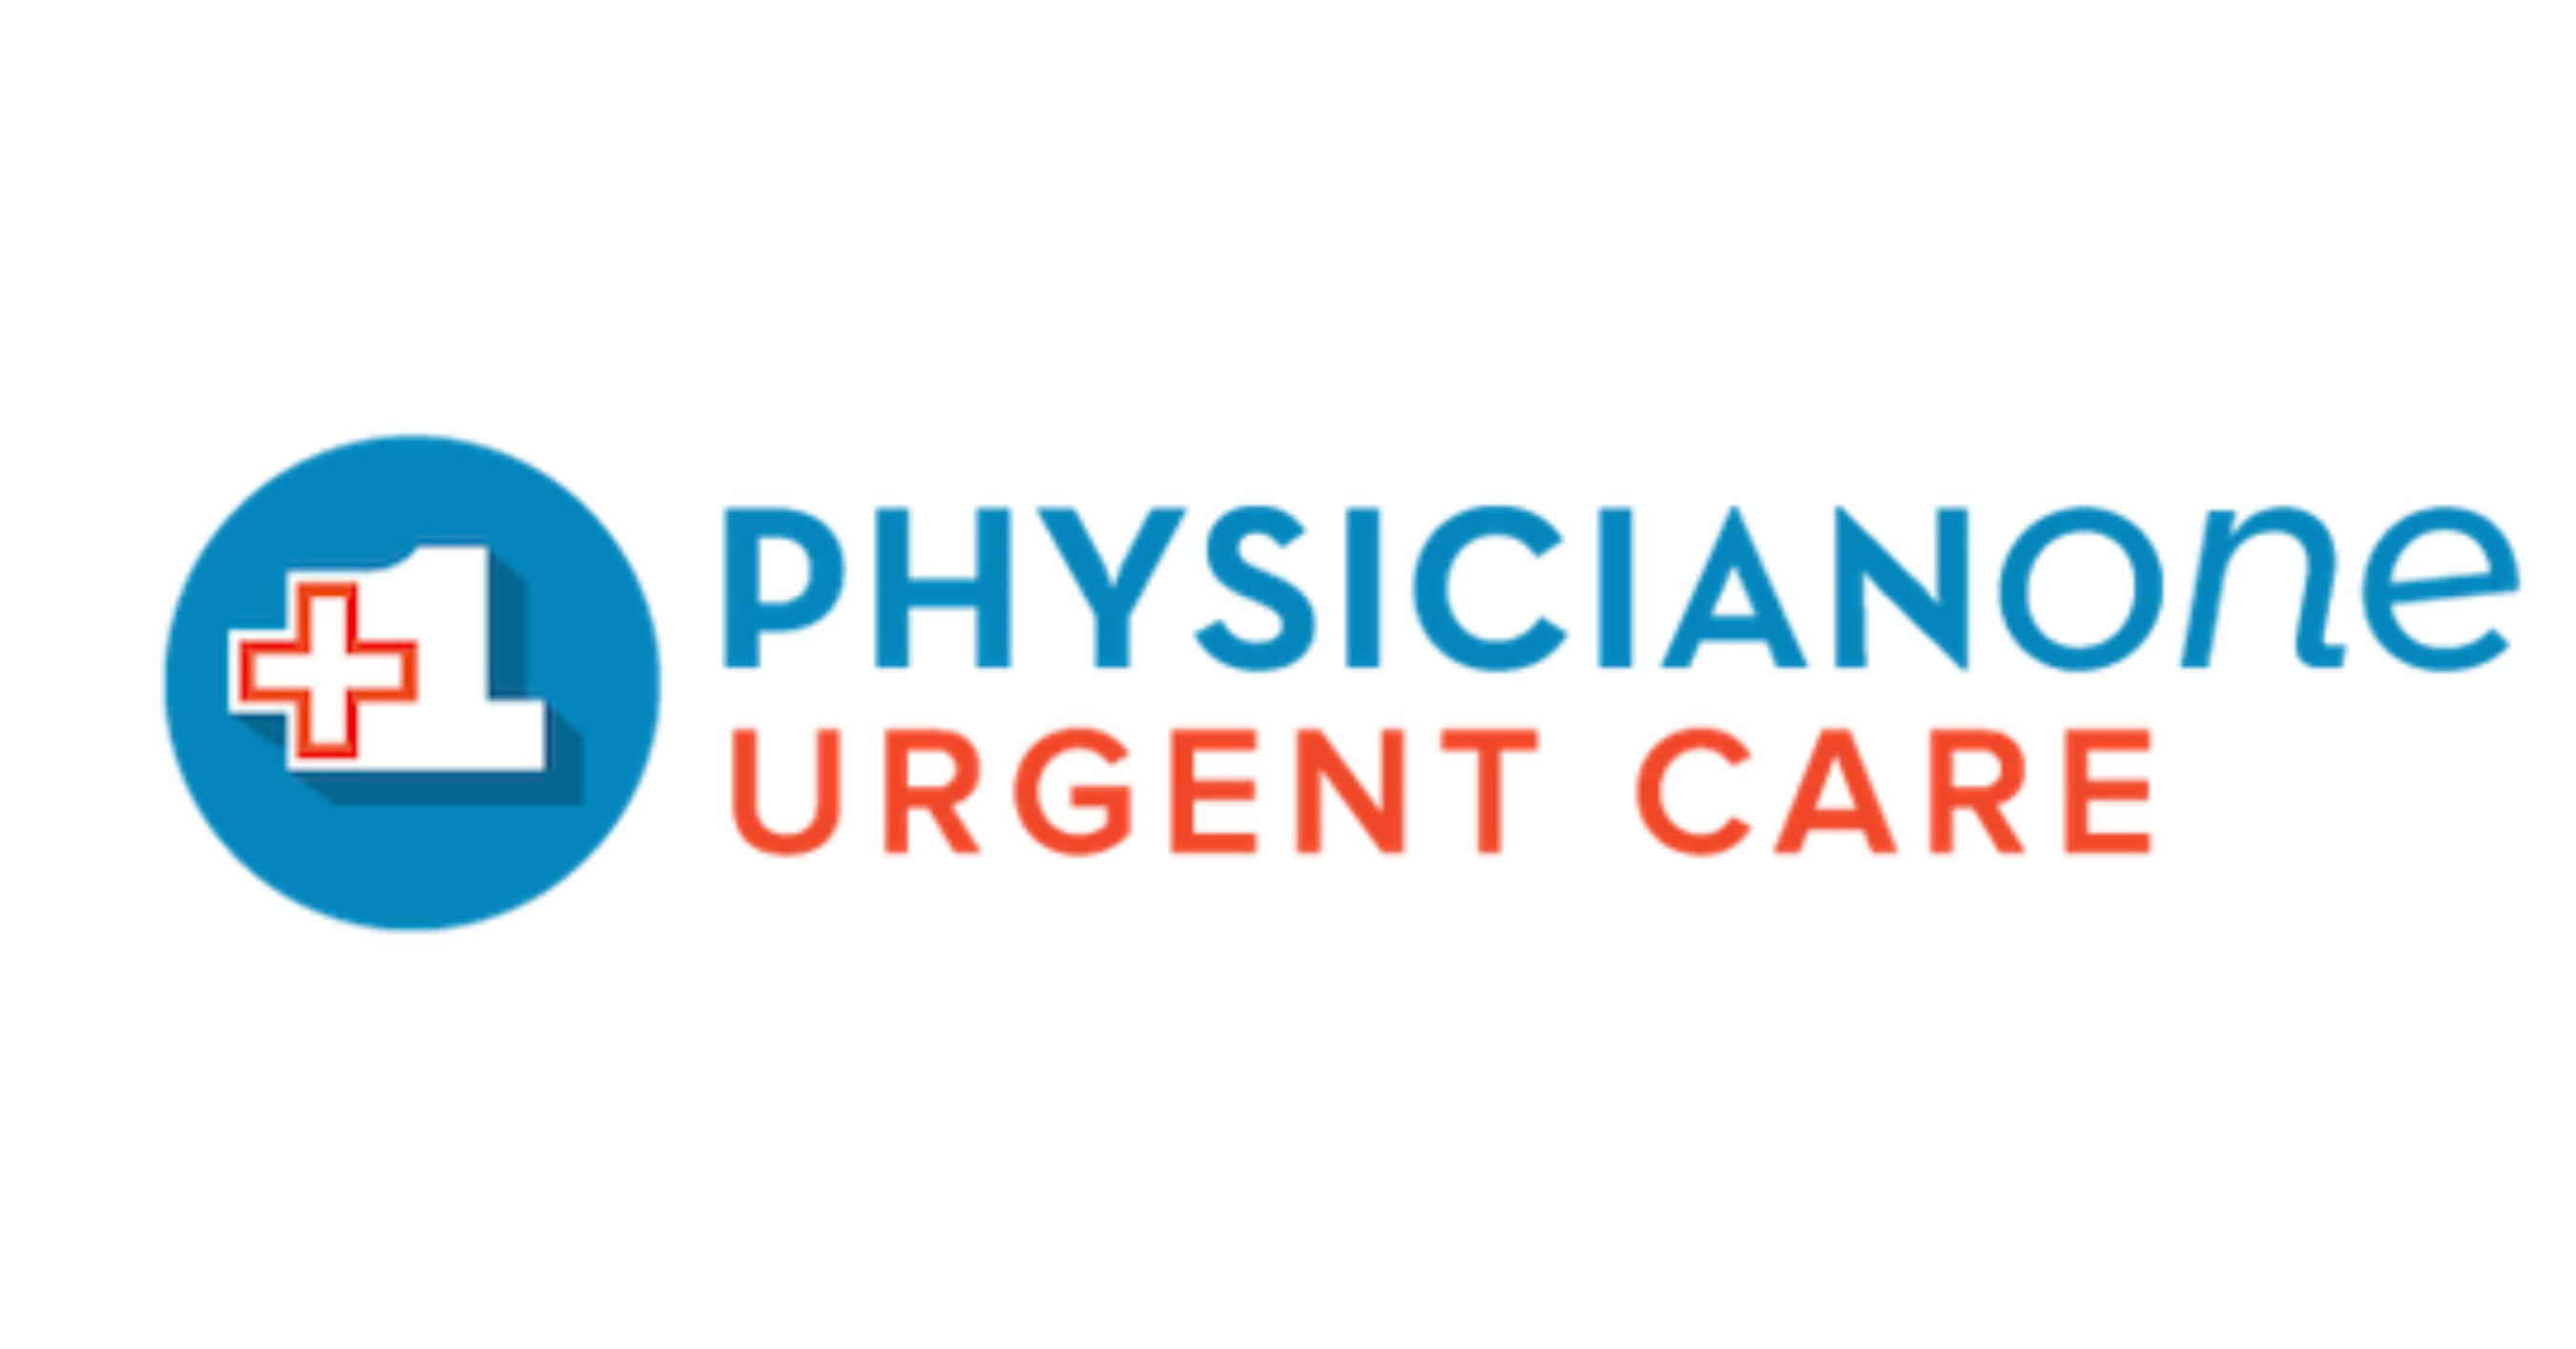 PhysicianOne Urgent Care and Wellforce Announce